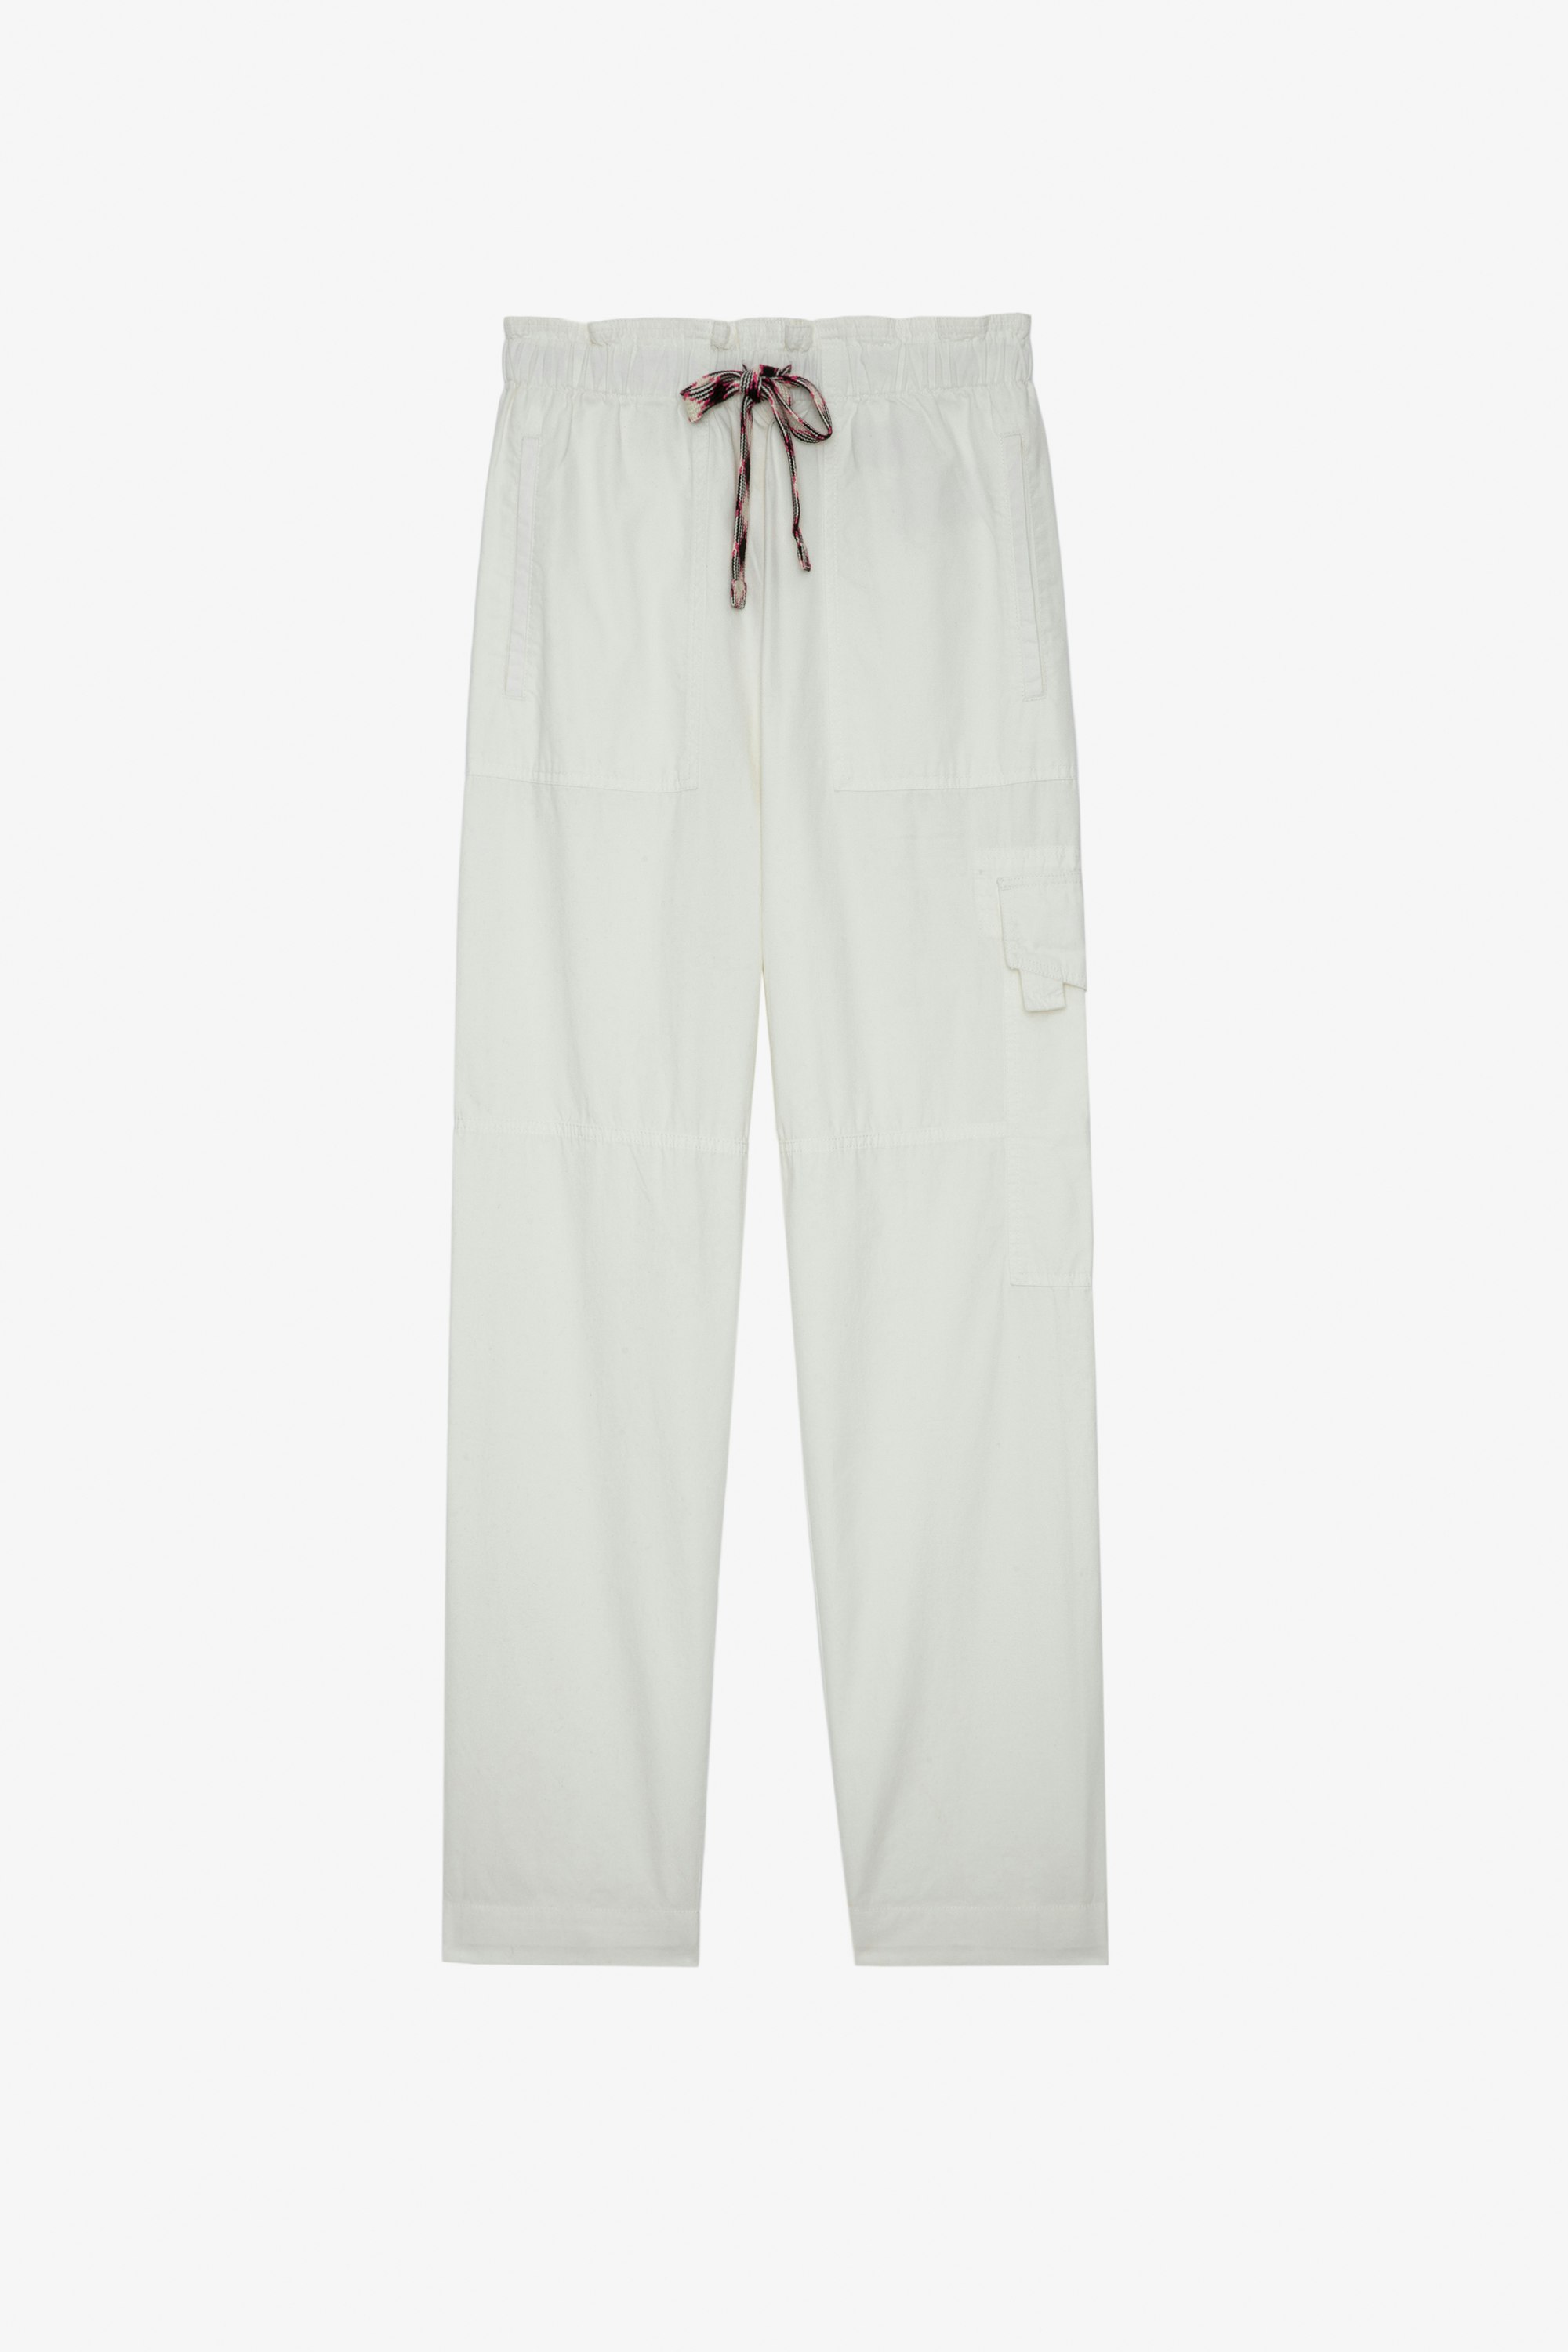 Plumy Trousers Women's white cotton trousers with belt